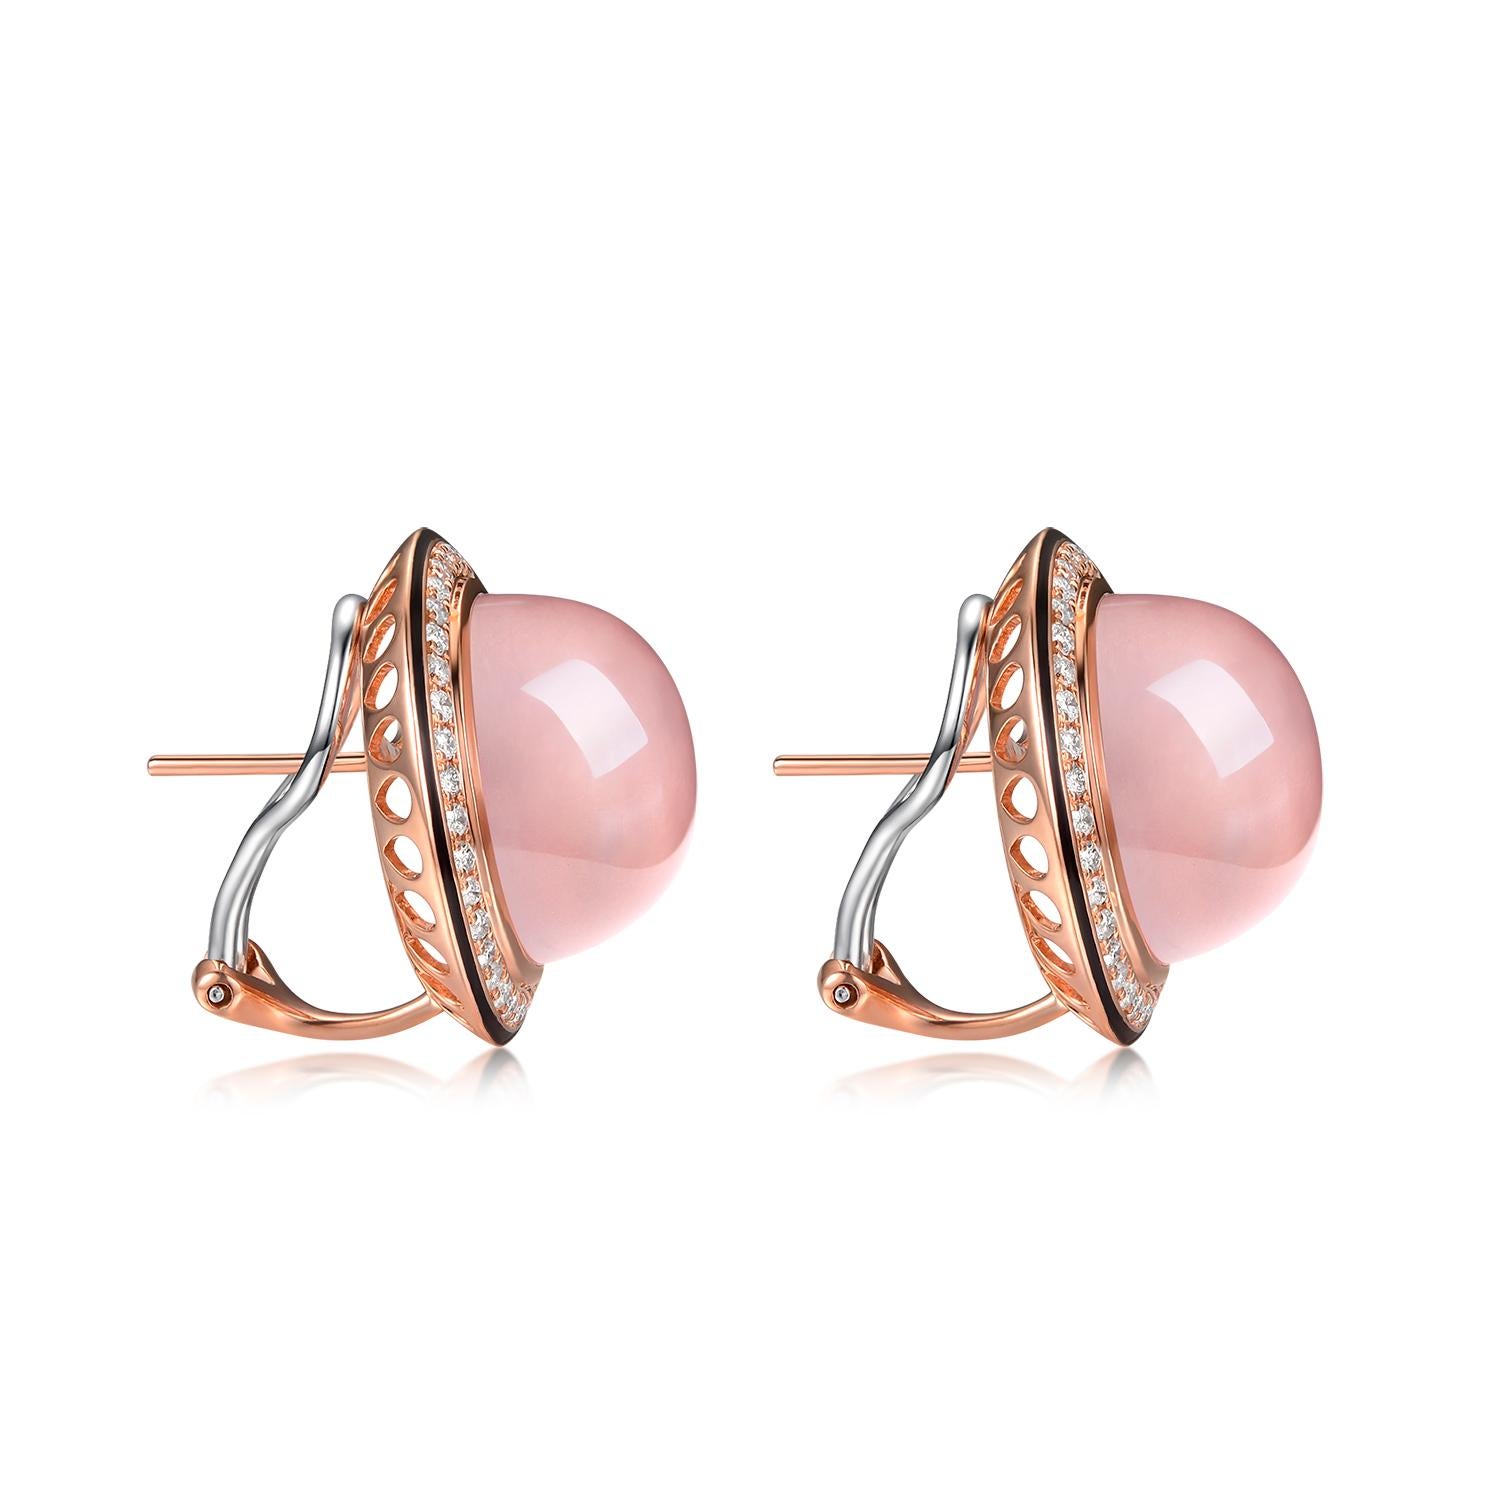 This earrings feature  42.67 carats oval cabochon rose quartz, rose quartz are set in bezel setting; rose quartz are surrounded by a diamond halo and black enamel outside the diamond halo. Earrings are set in 18 karat rose gold. Matching ring is